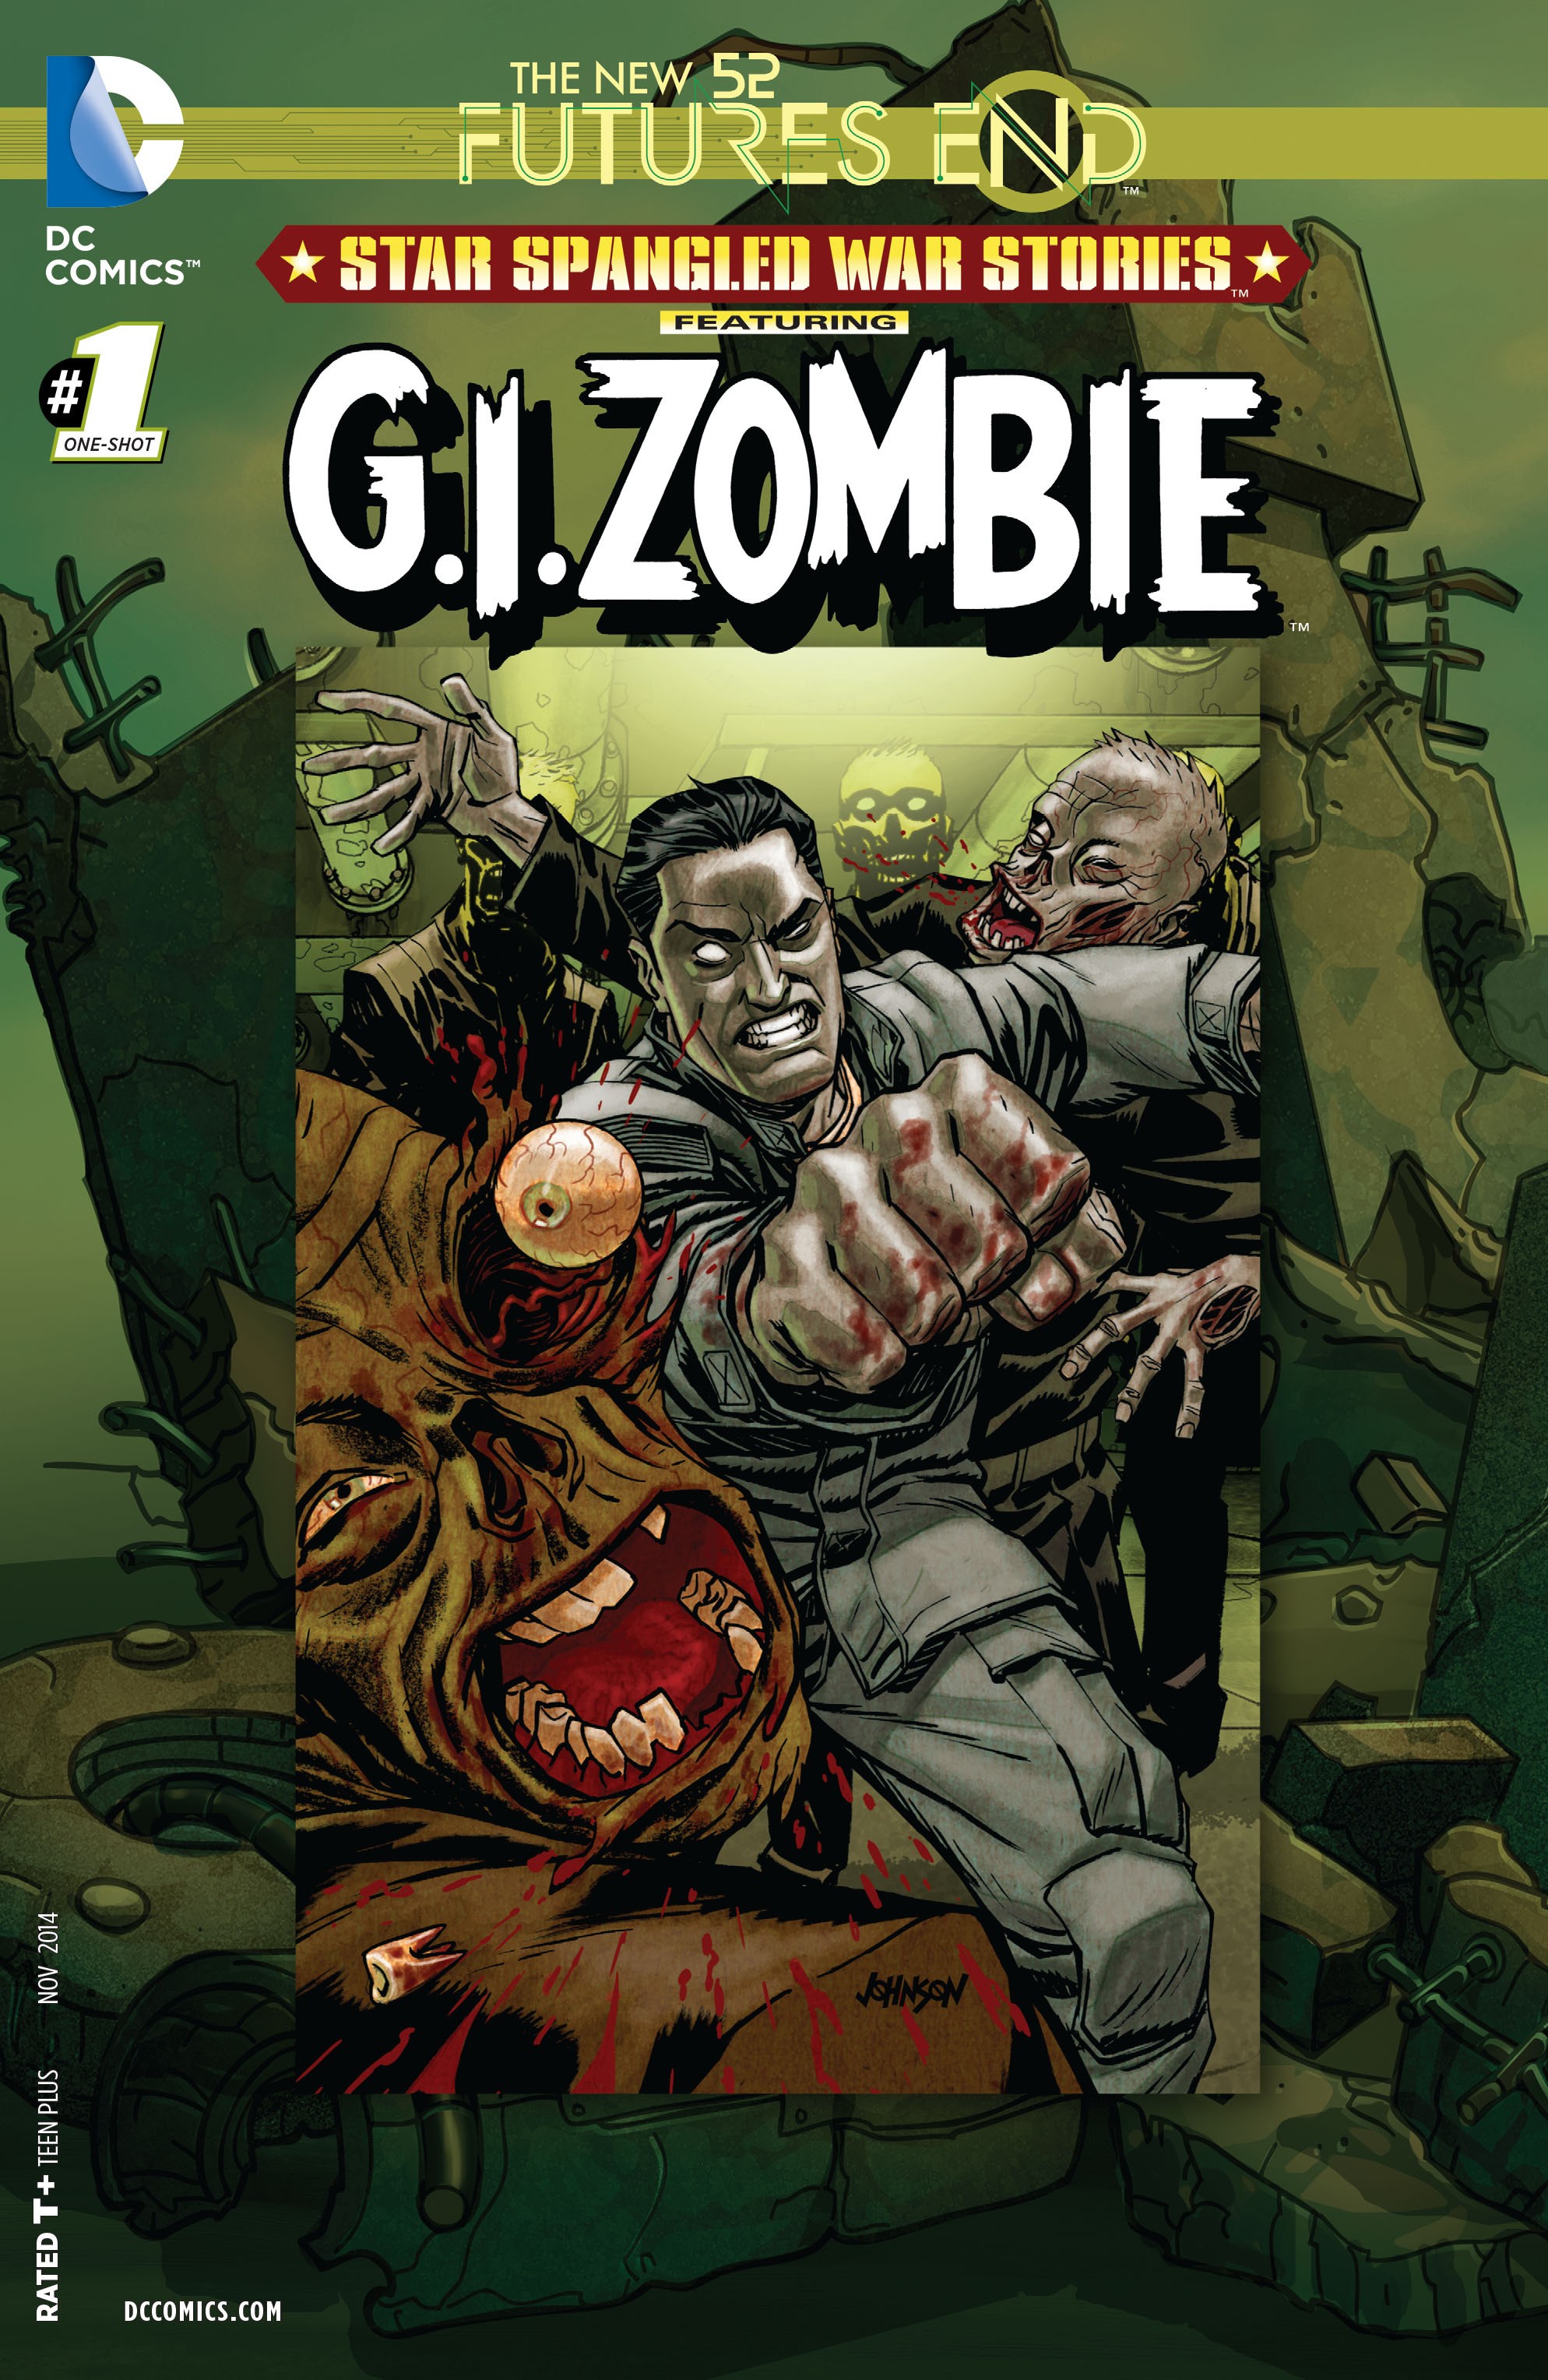 Star-Spangled War Stories Featuring G.I. Zombie: Futures End Vol. 1 #1